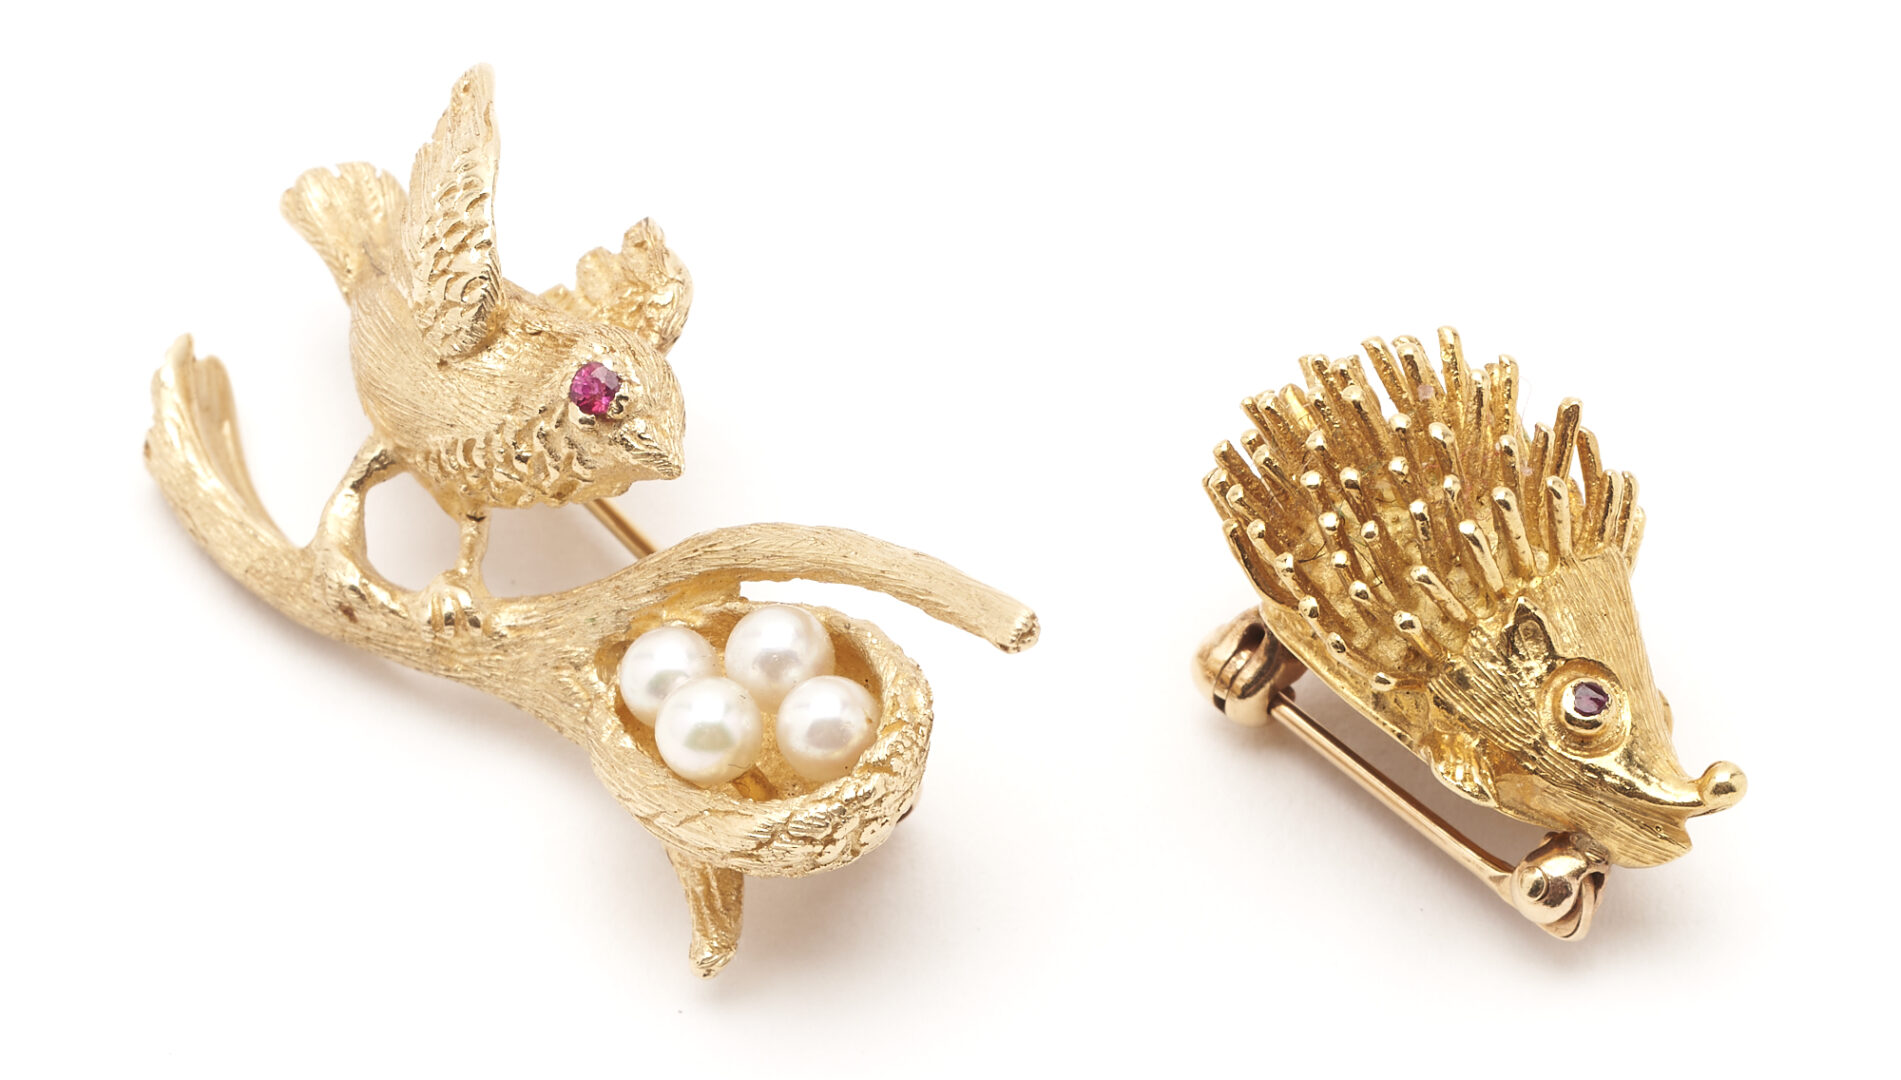 Lot 428: 2 Yellow Gold & Gemstone Bird and Hedgehog Brooches, 18K and 14K